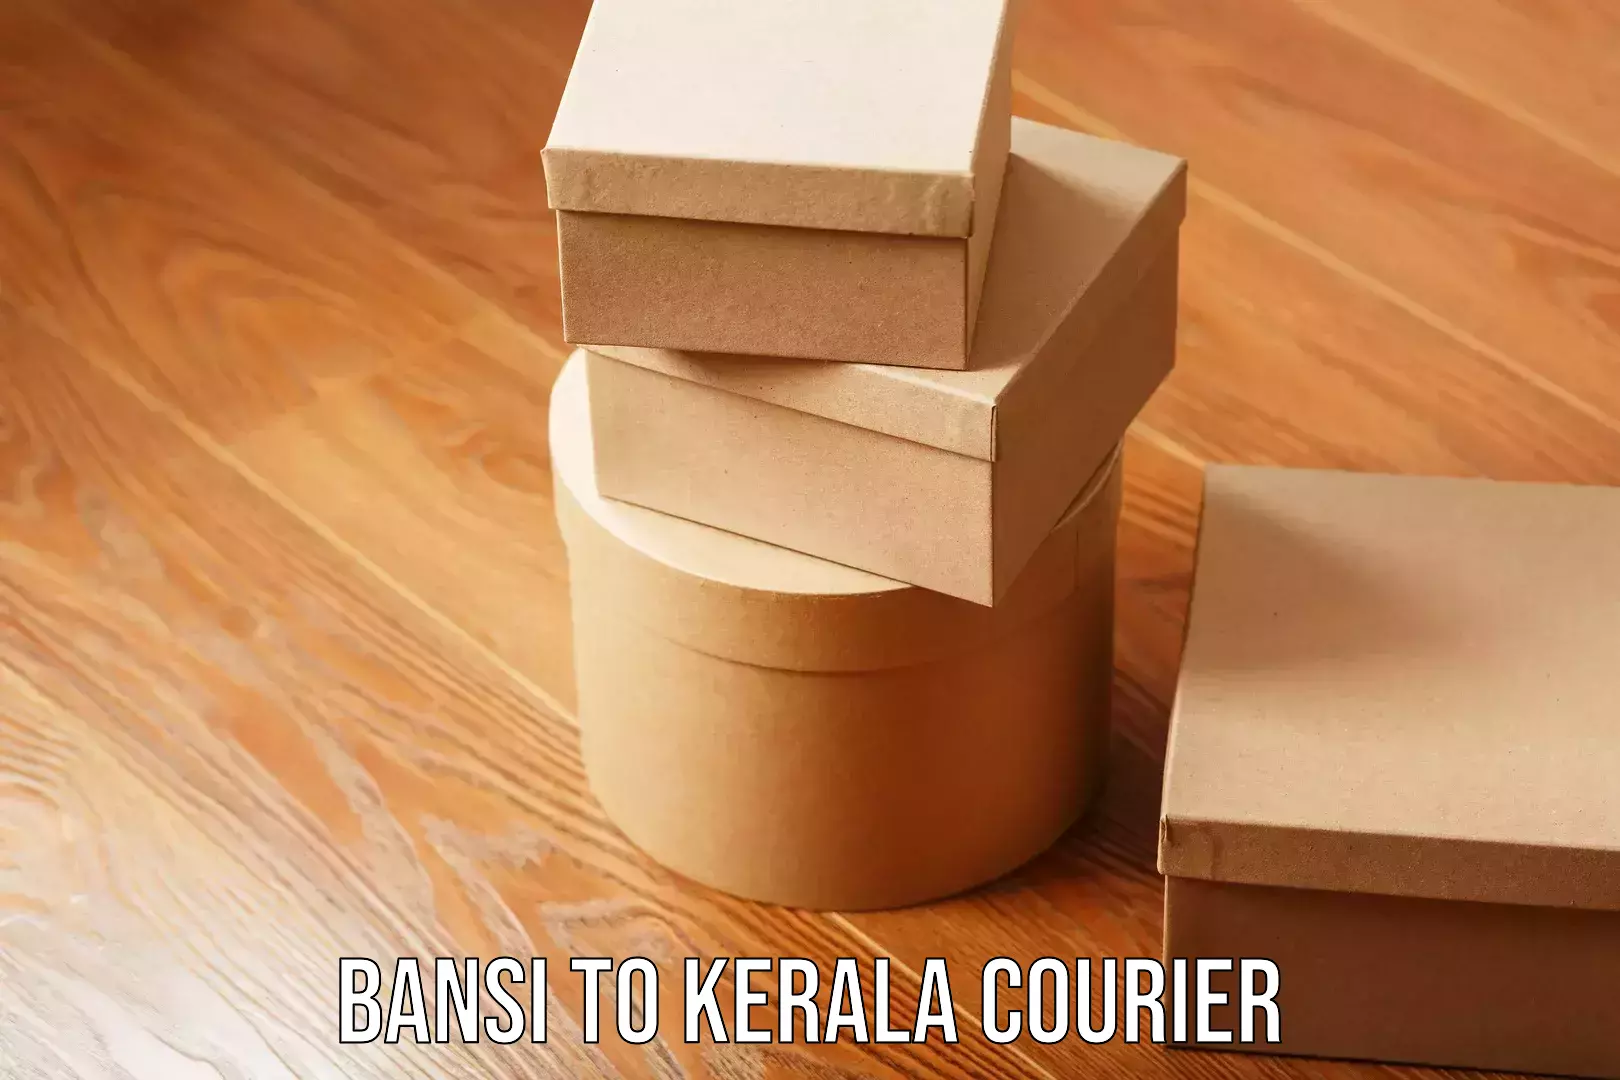 Reliable delivery network Bansi to Kerala